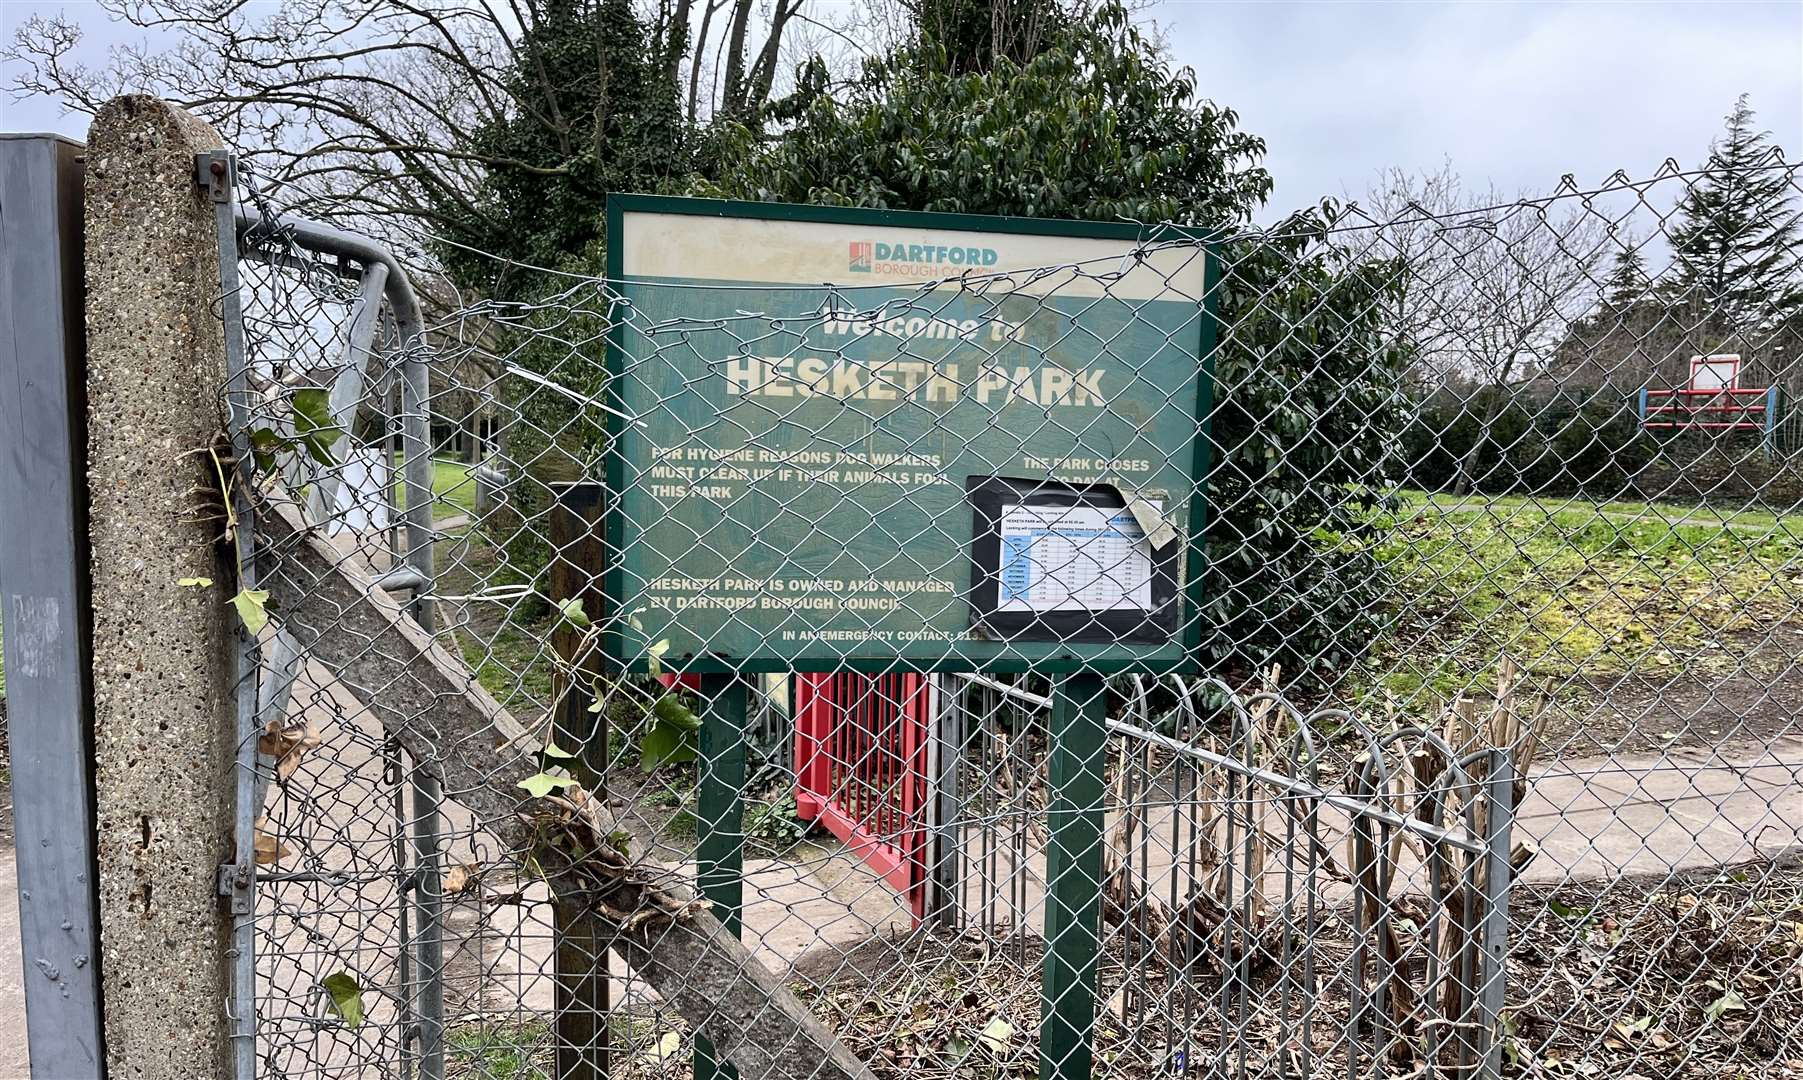 Trees have been cut down at Hesketh Park, in Pilgrims Way, Dartford